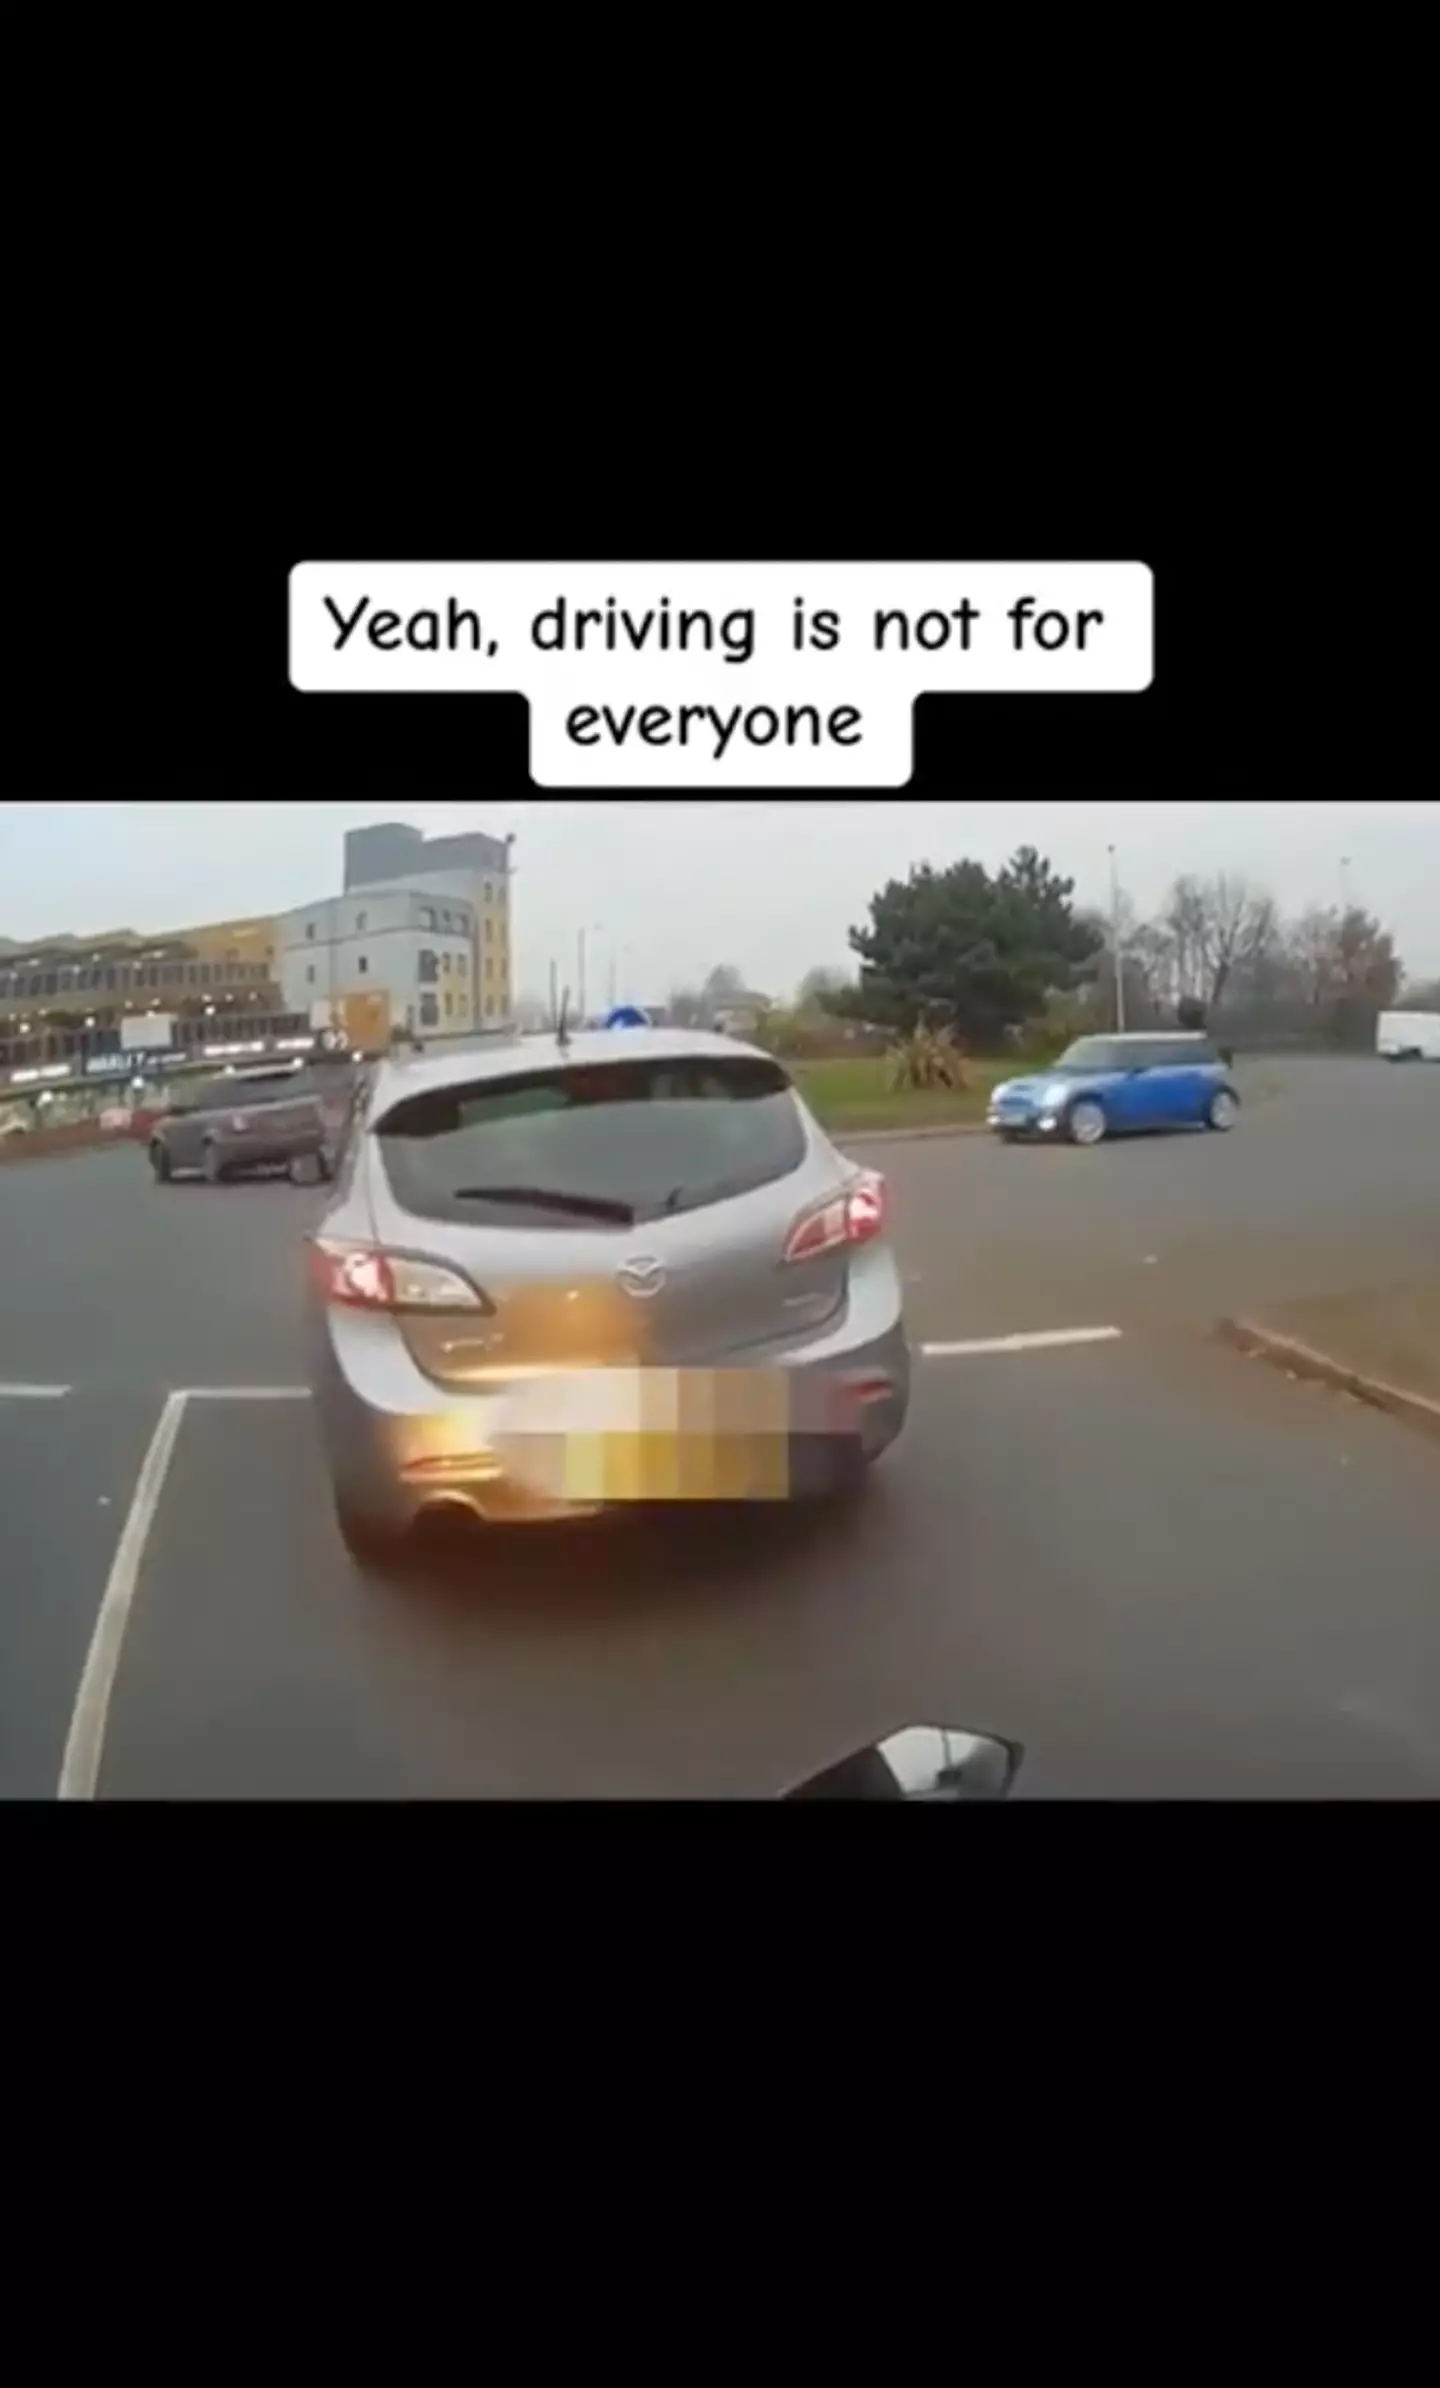 The motorcyclist has gone viral after their dash cam footage was uploaded.